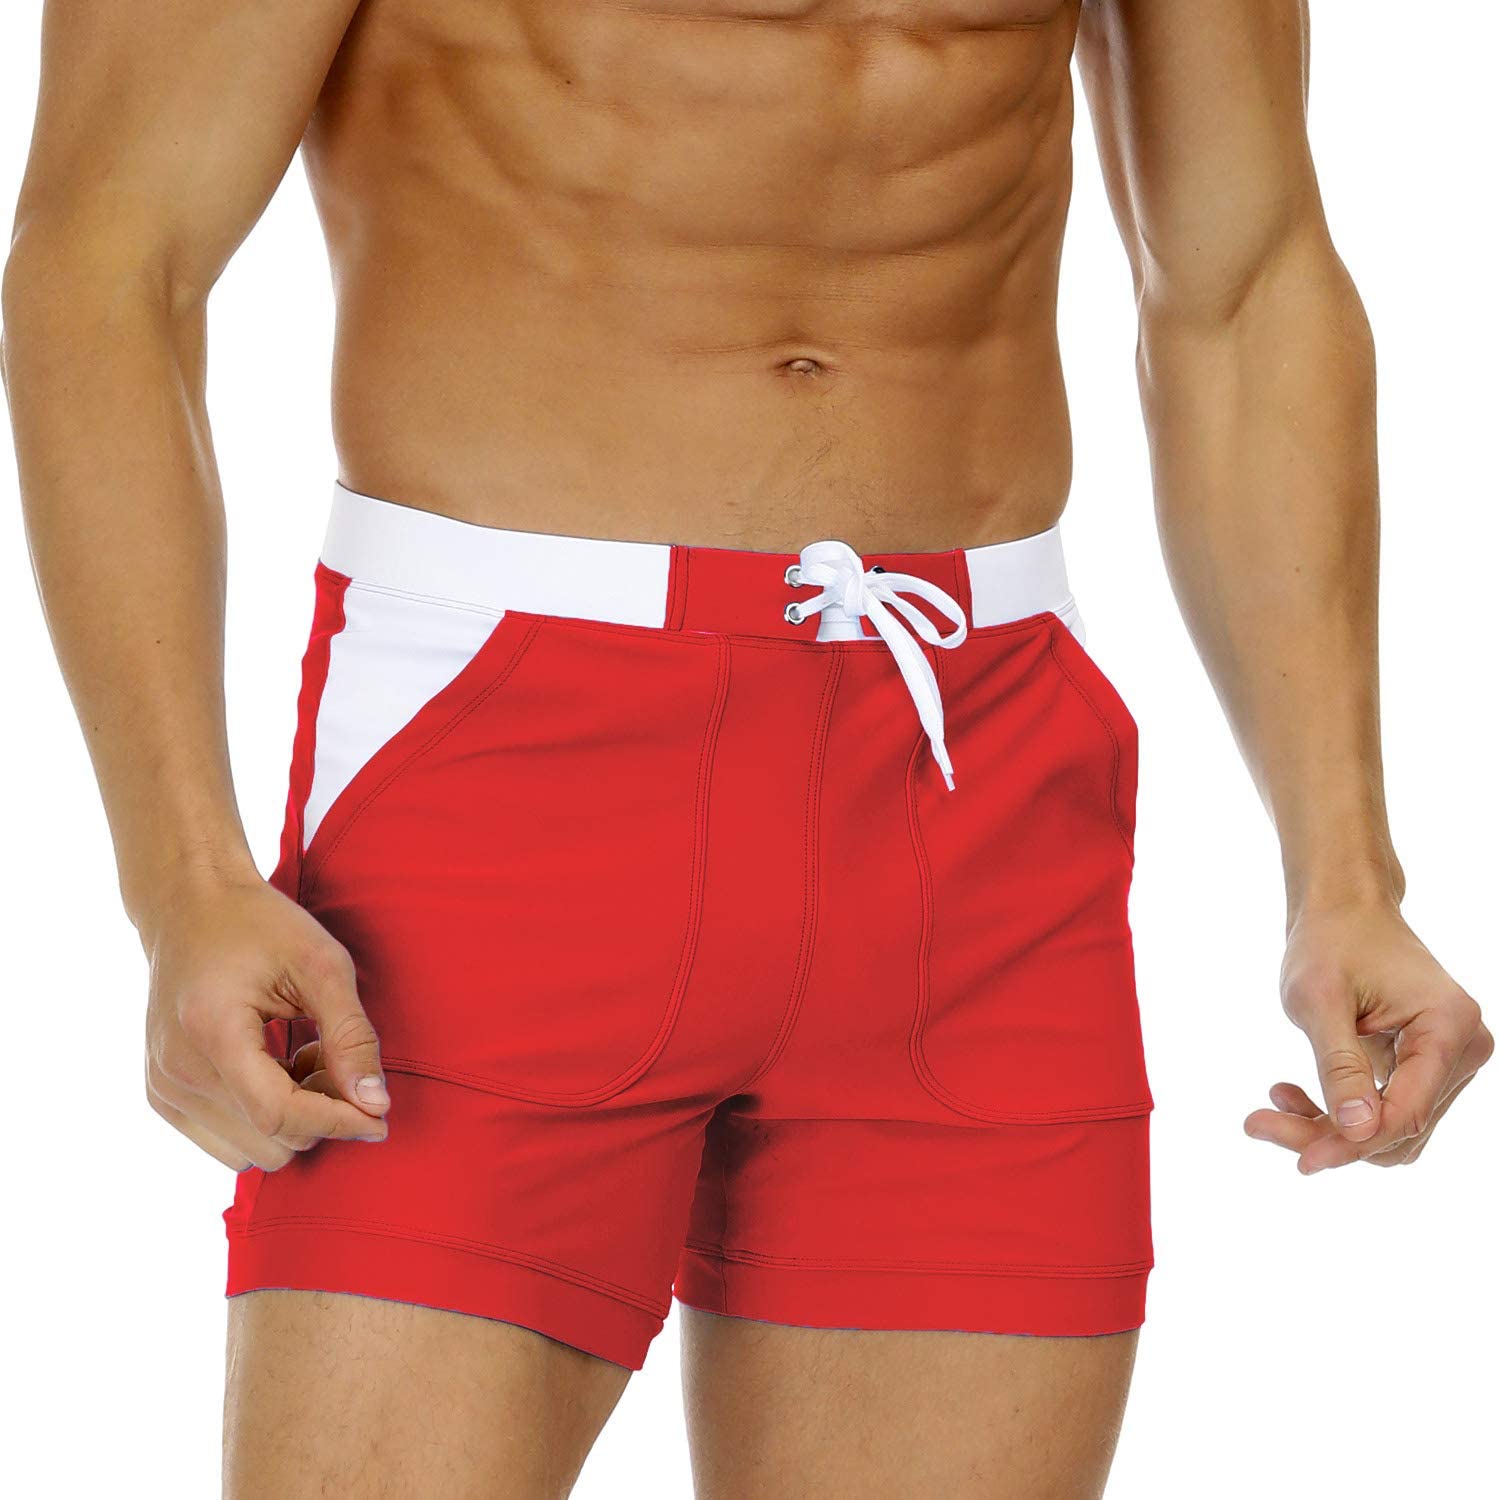 BIYLACLESEN Men's Swim Trunks with Mesh Lining Quick Dry Bathing Suits ...